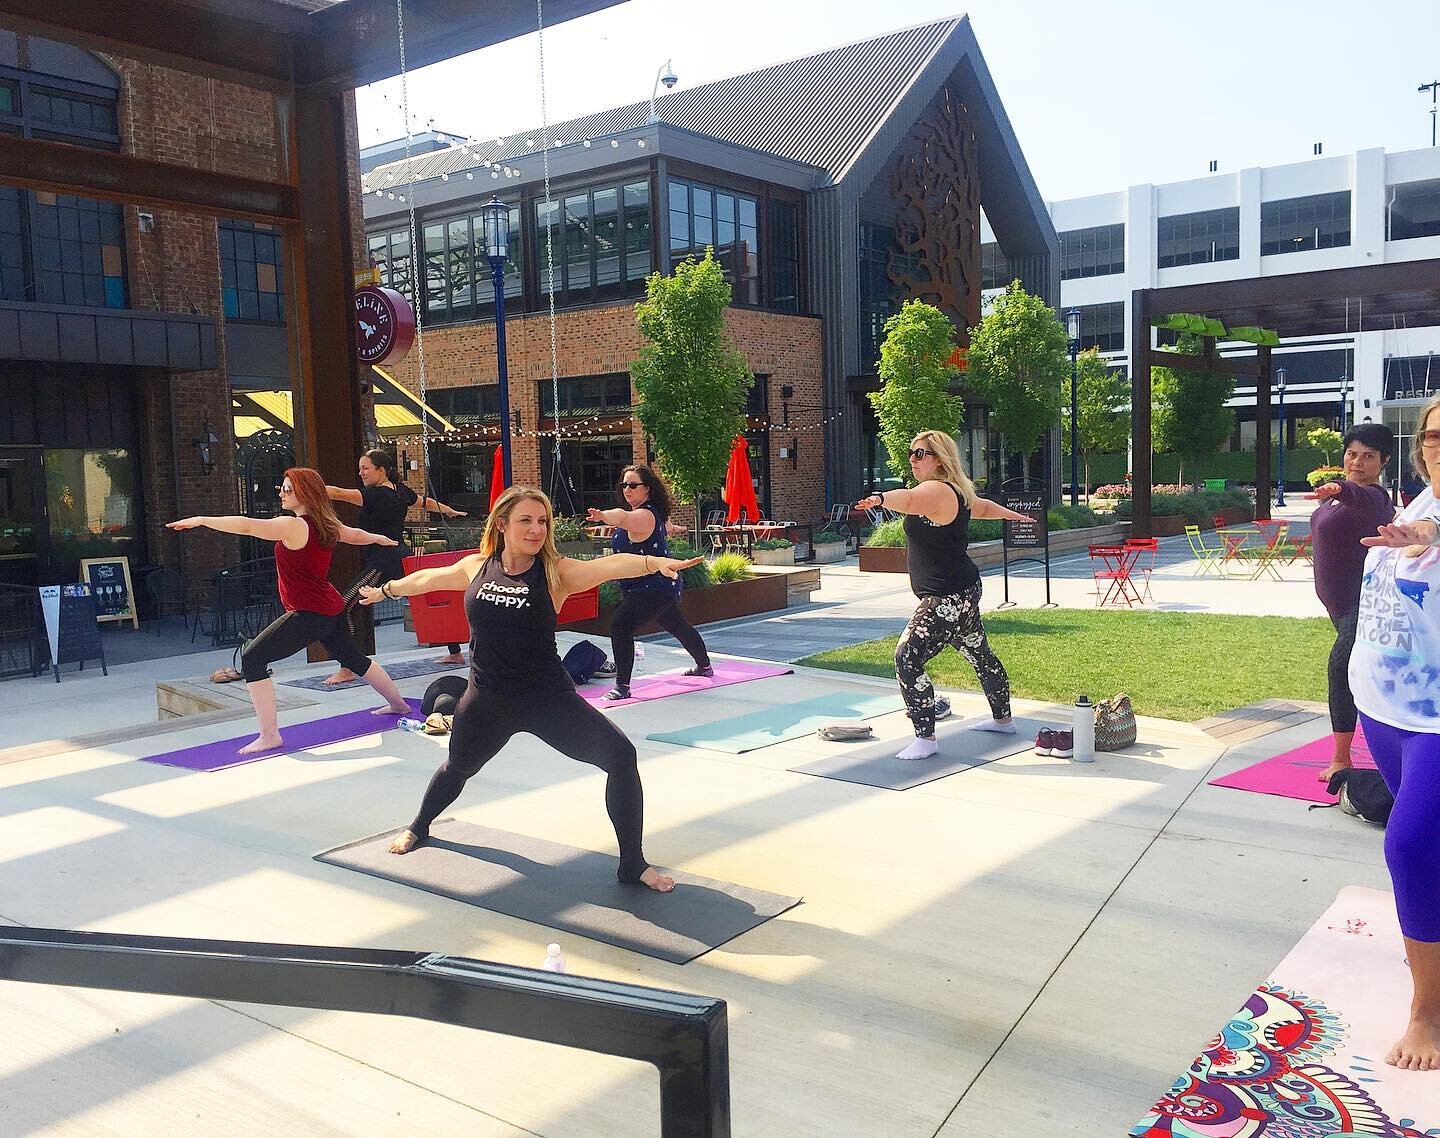 &ldquo;Eventually all things fall into place. Until then, laugh at the confusion, live for the moments, and know EVERYTHING HAPPENS FOR A REASON.&rdquo;
-Albert Schweitzer

started a holiday weekend off with my summer yoga series at Easton.  This is 